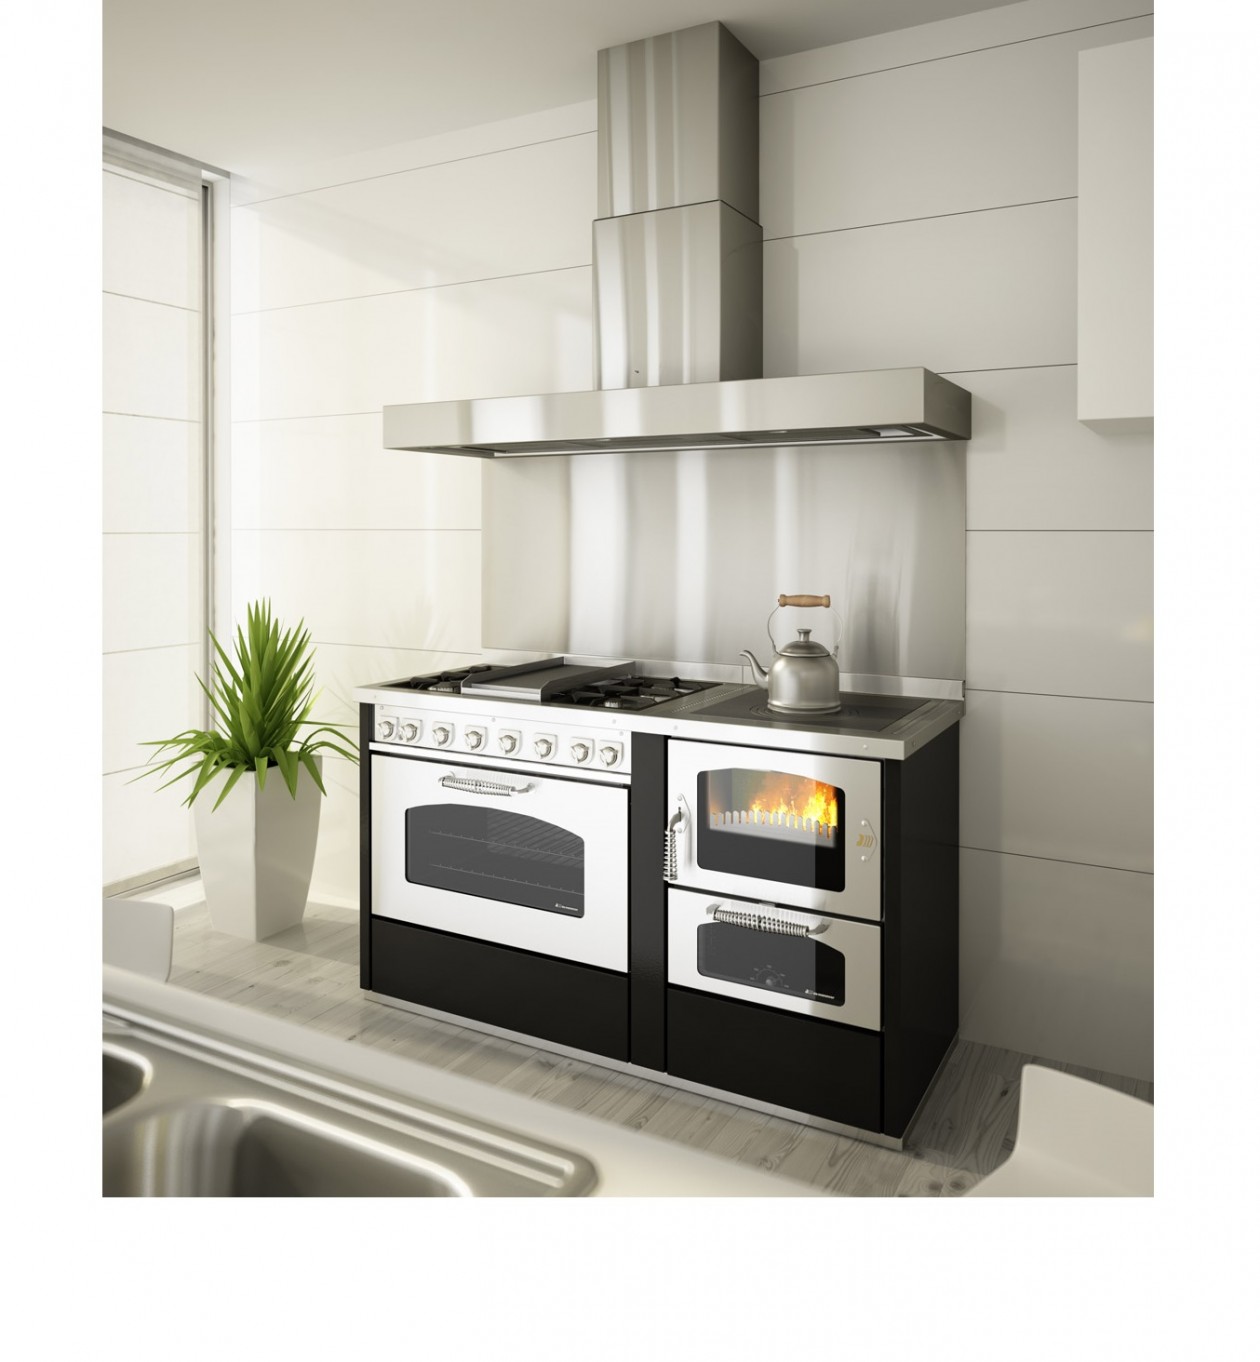 Foto: w3 manincor formuis esse cookers